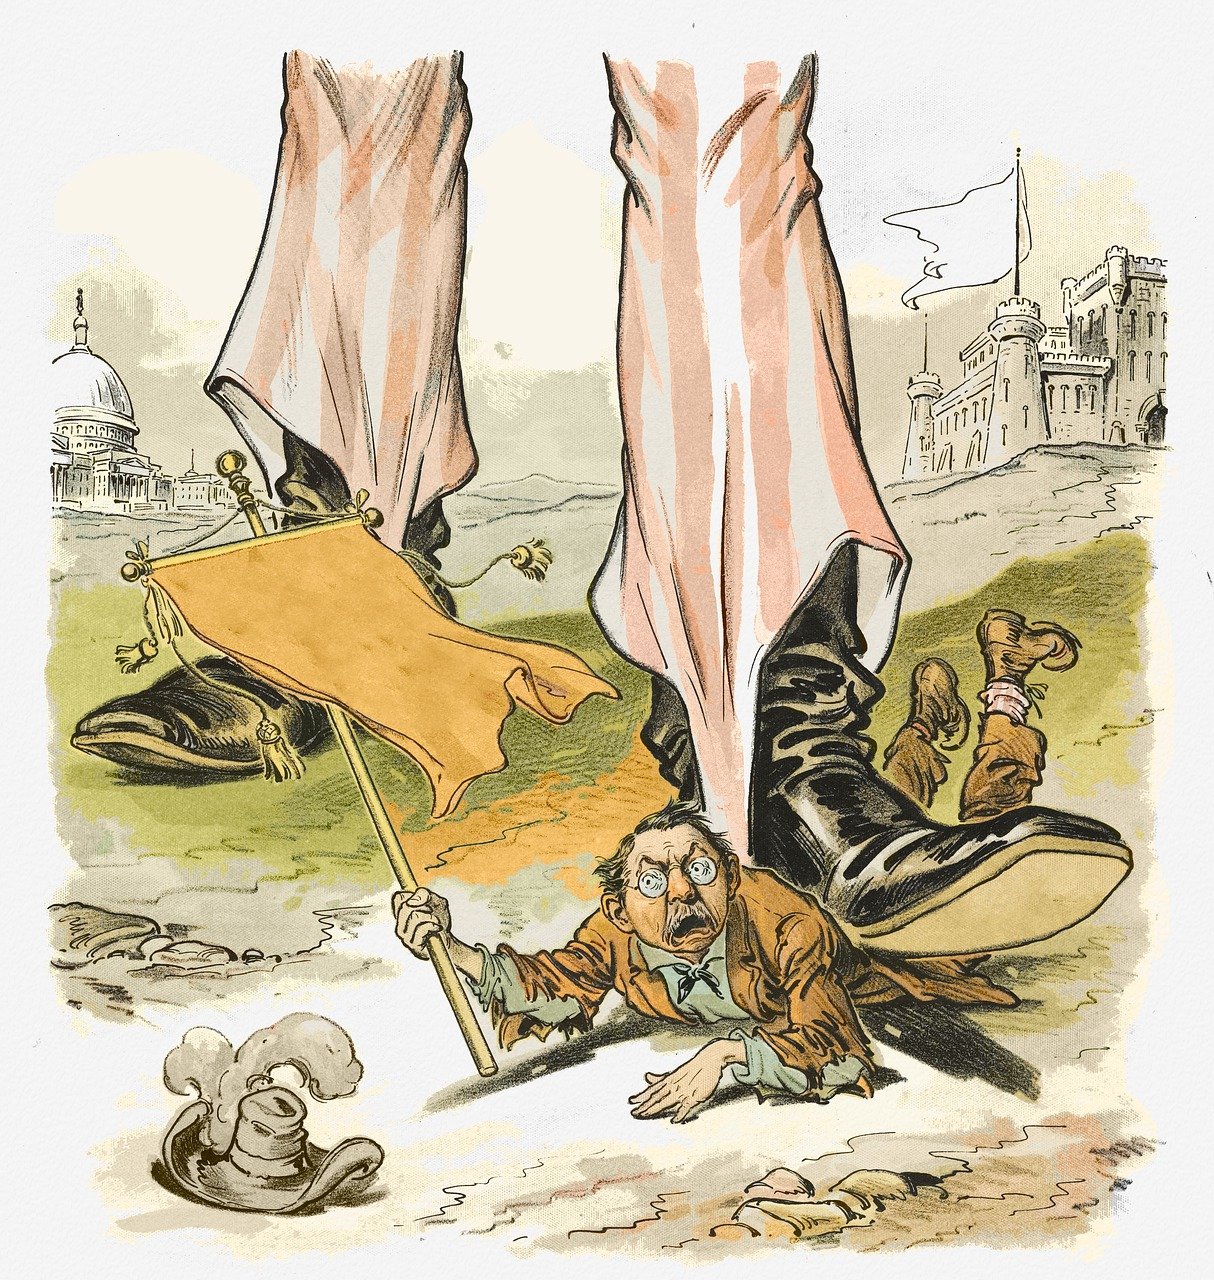 a cartoon picture of a man standing over a dead dog, an illustration of, by Julius Exner, shutterstock, conceptual art, flag in his right hand, stepping on towers, inauguration, editorial illustration